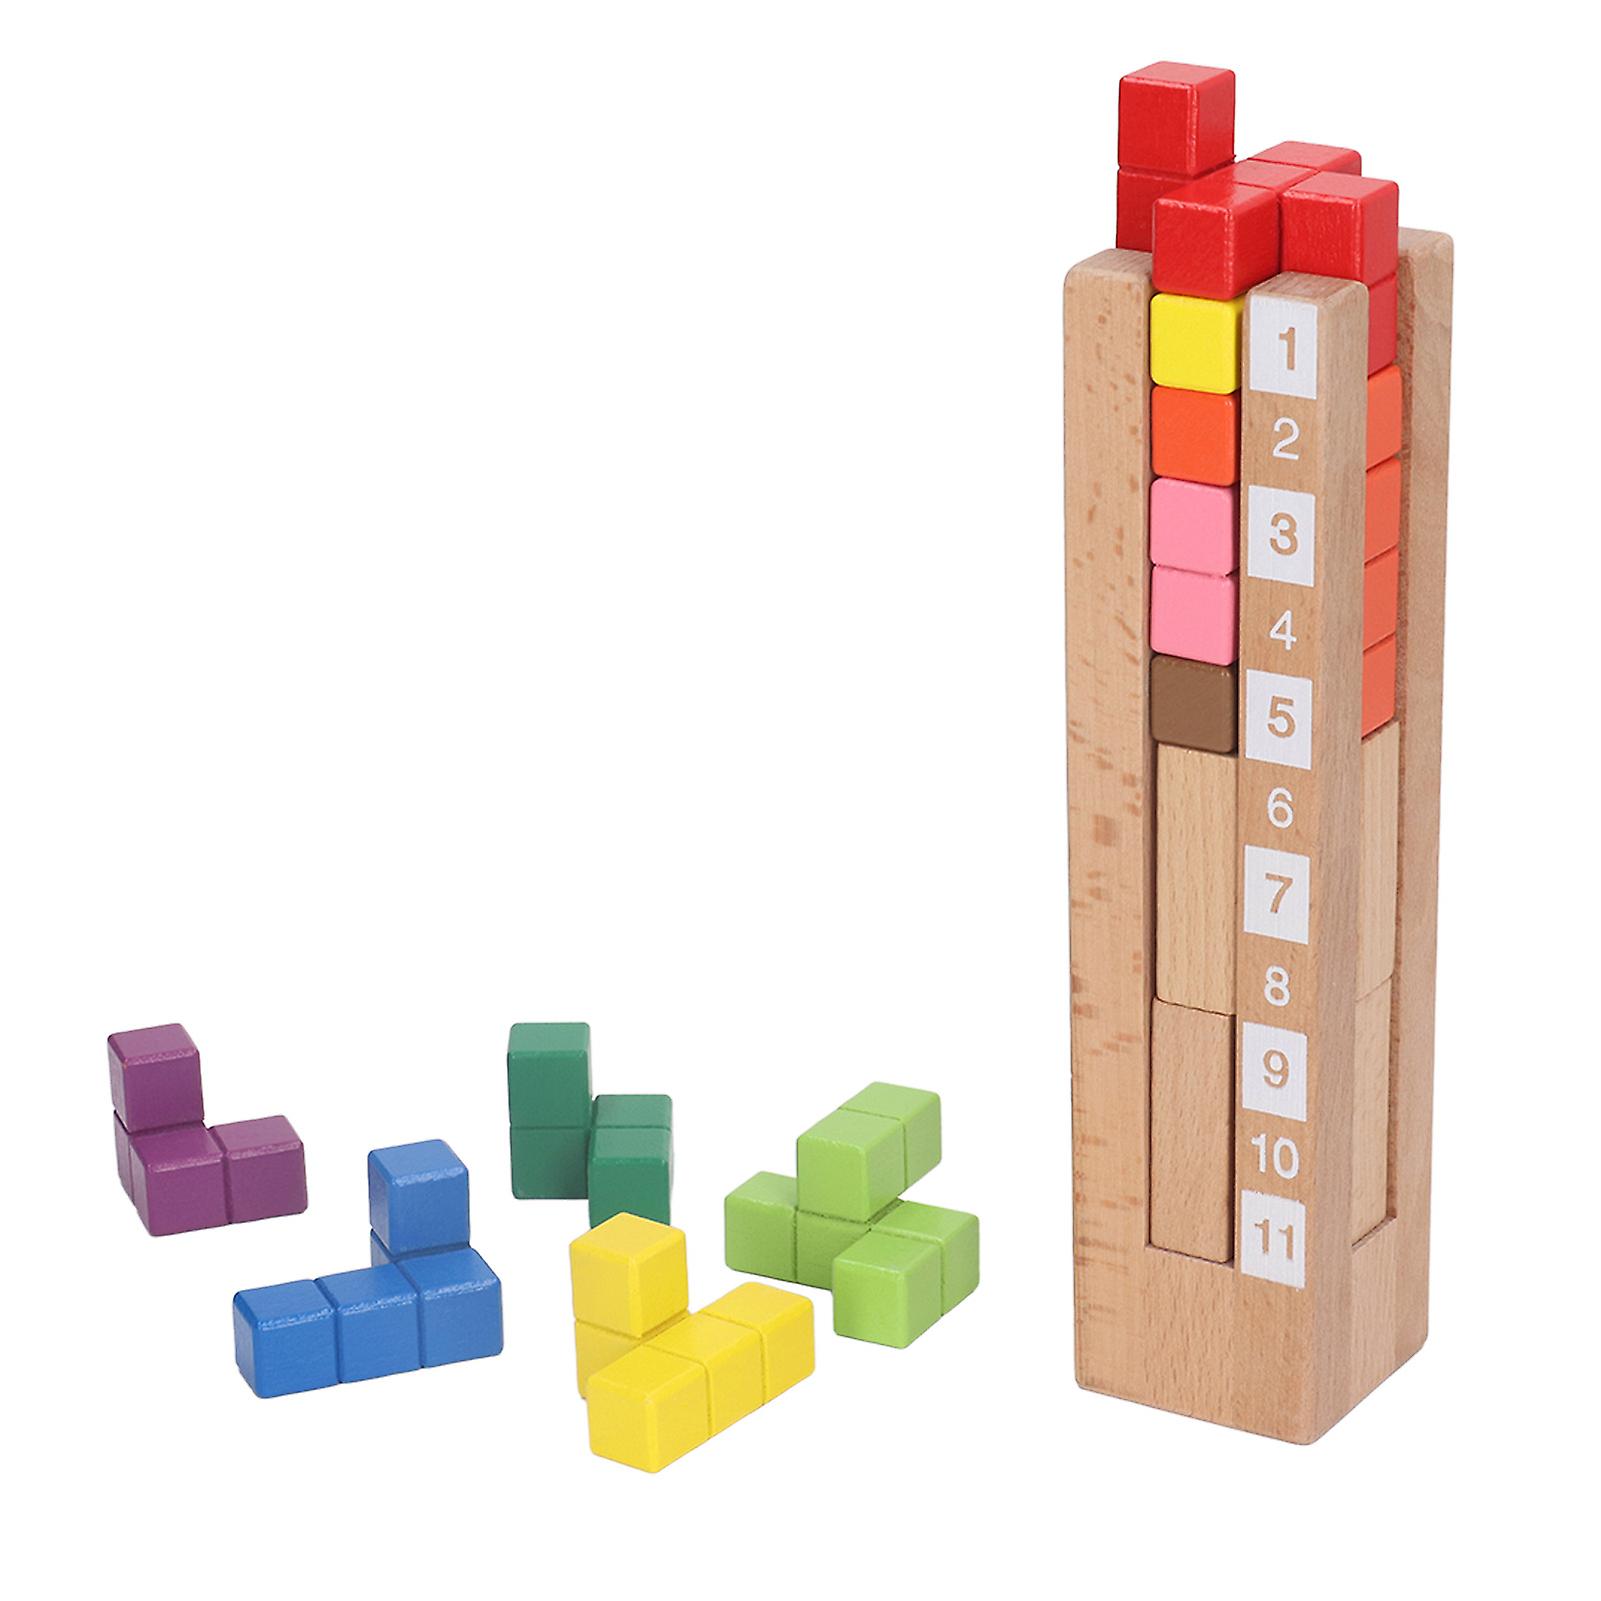 Colored Wooden Stacking Blocks Board Games for Kids Educational Preschool Learning Tower Blocks Toy